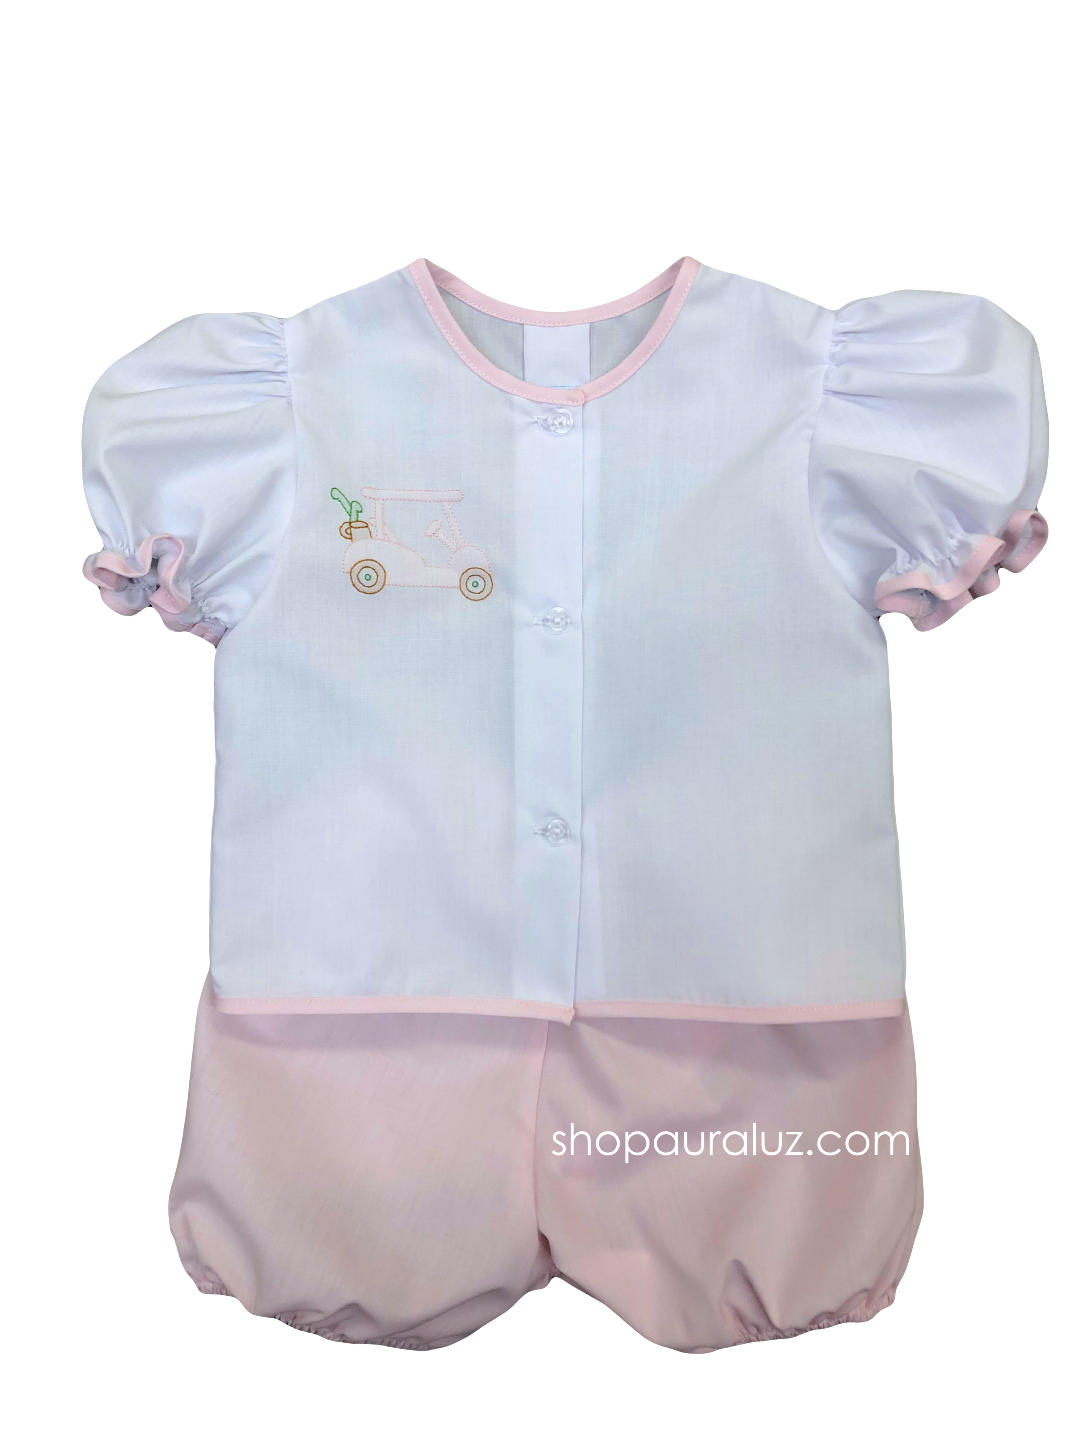 Auraluz 2pc Set...White top with embroidered golf cart and pink bloomer shorts